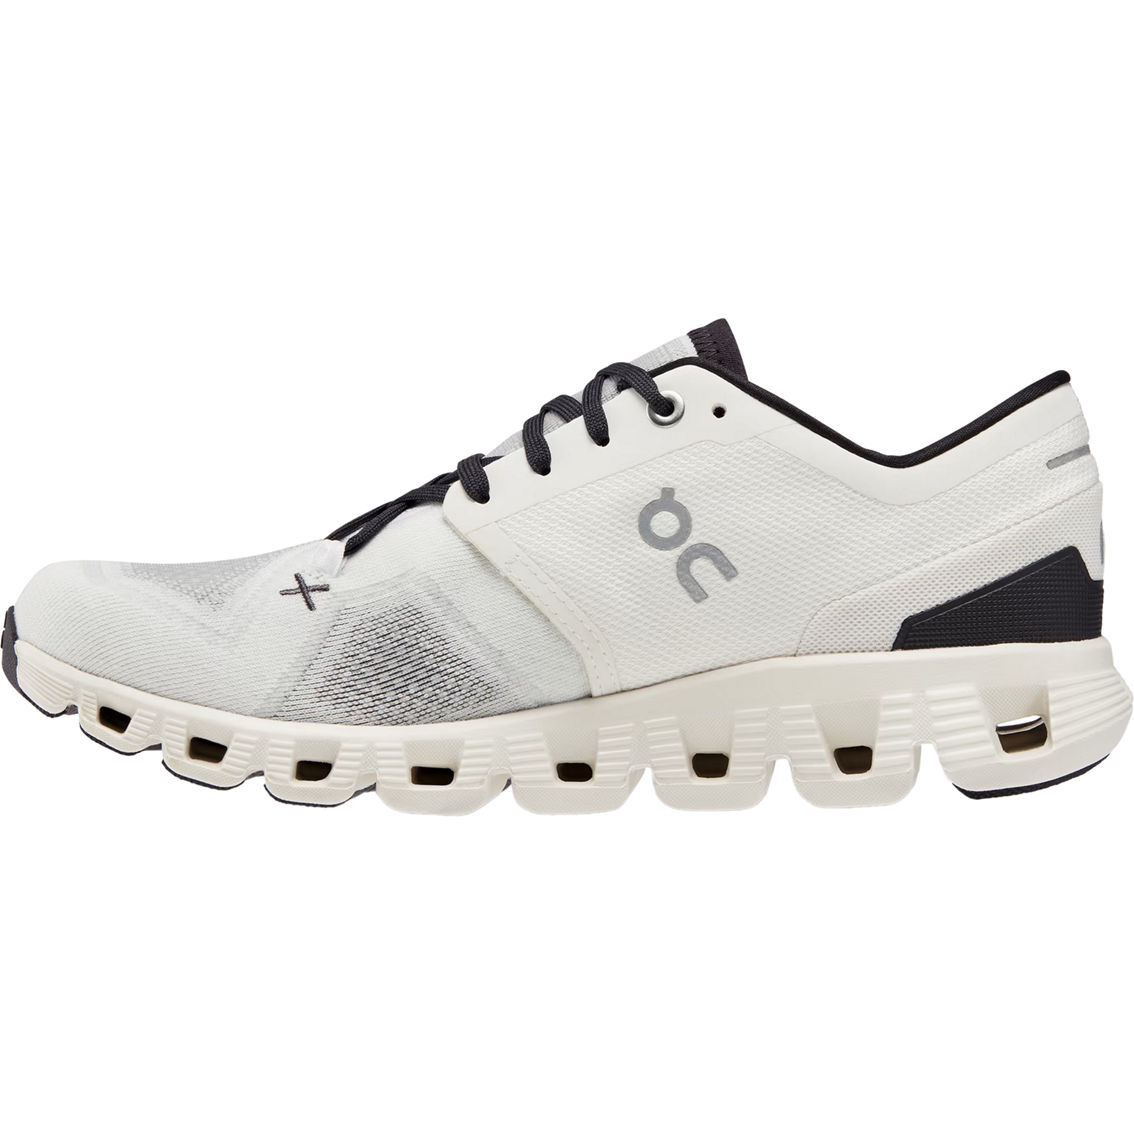 On Women's Cloud X 3 Running Shoes | Women's Athletic Shoes | Shoes ...